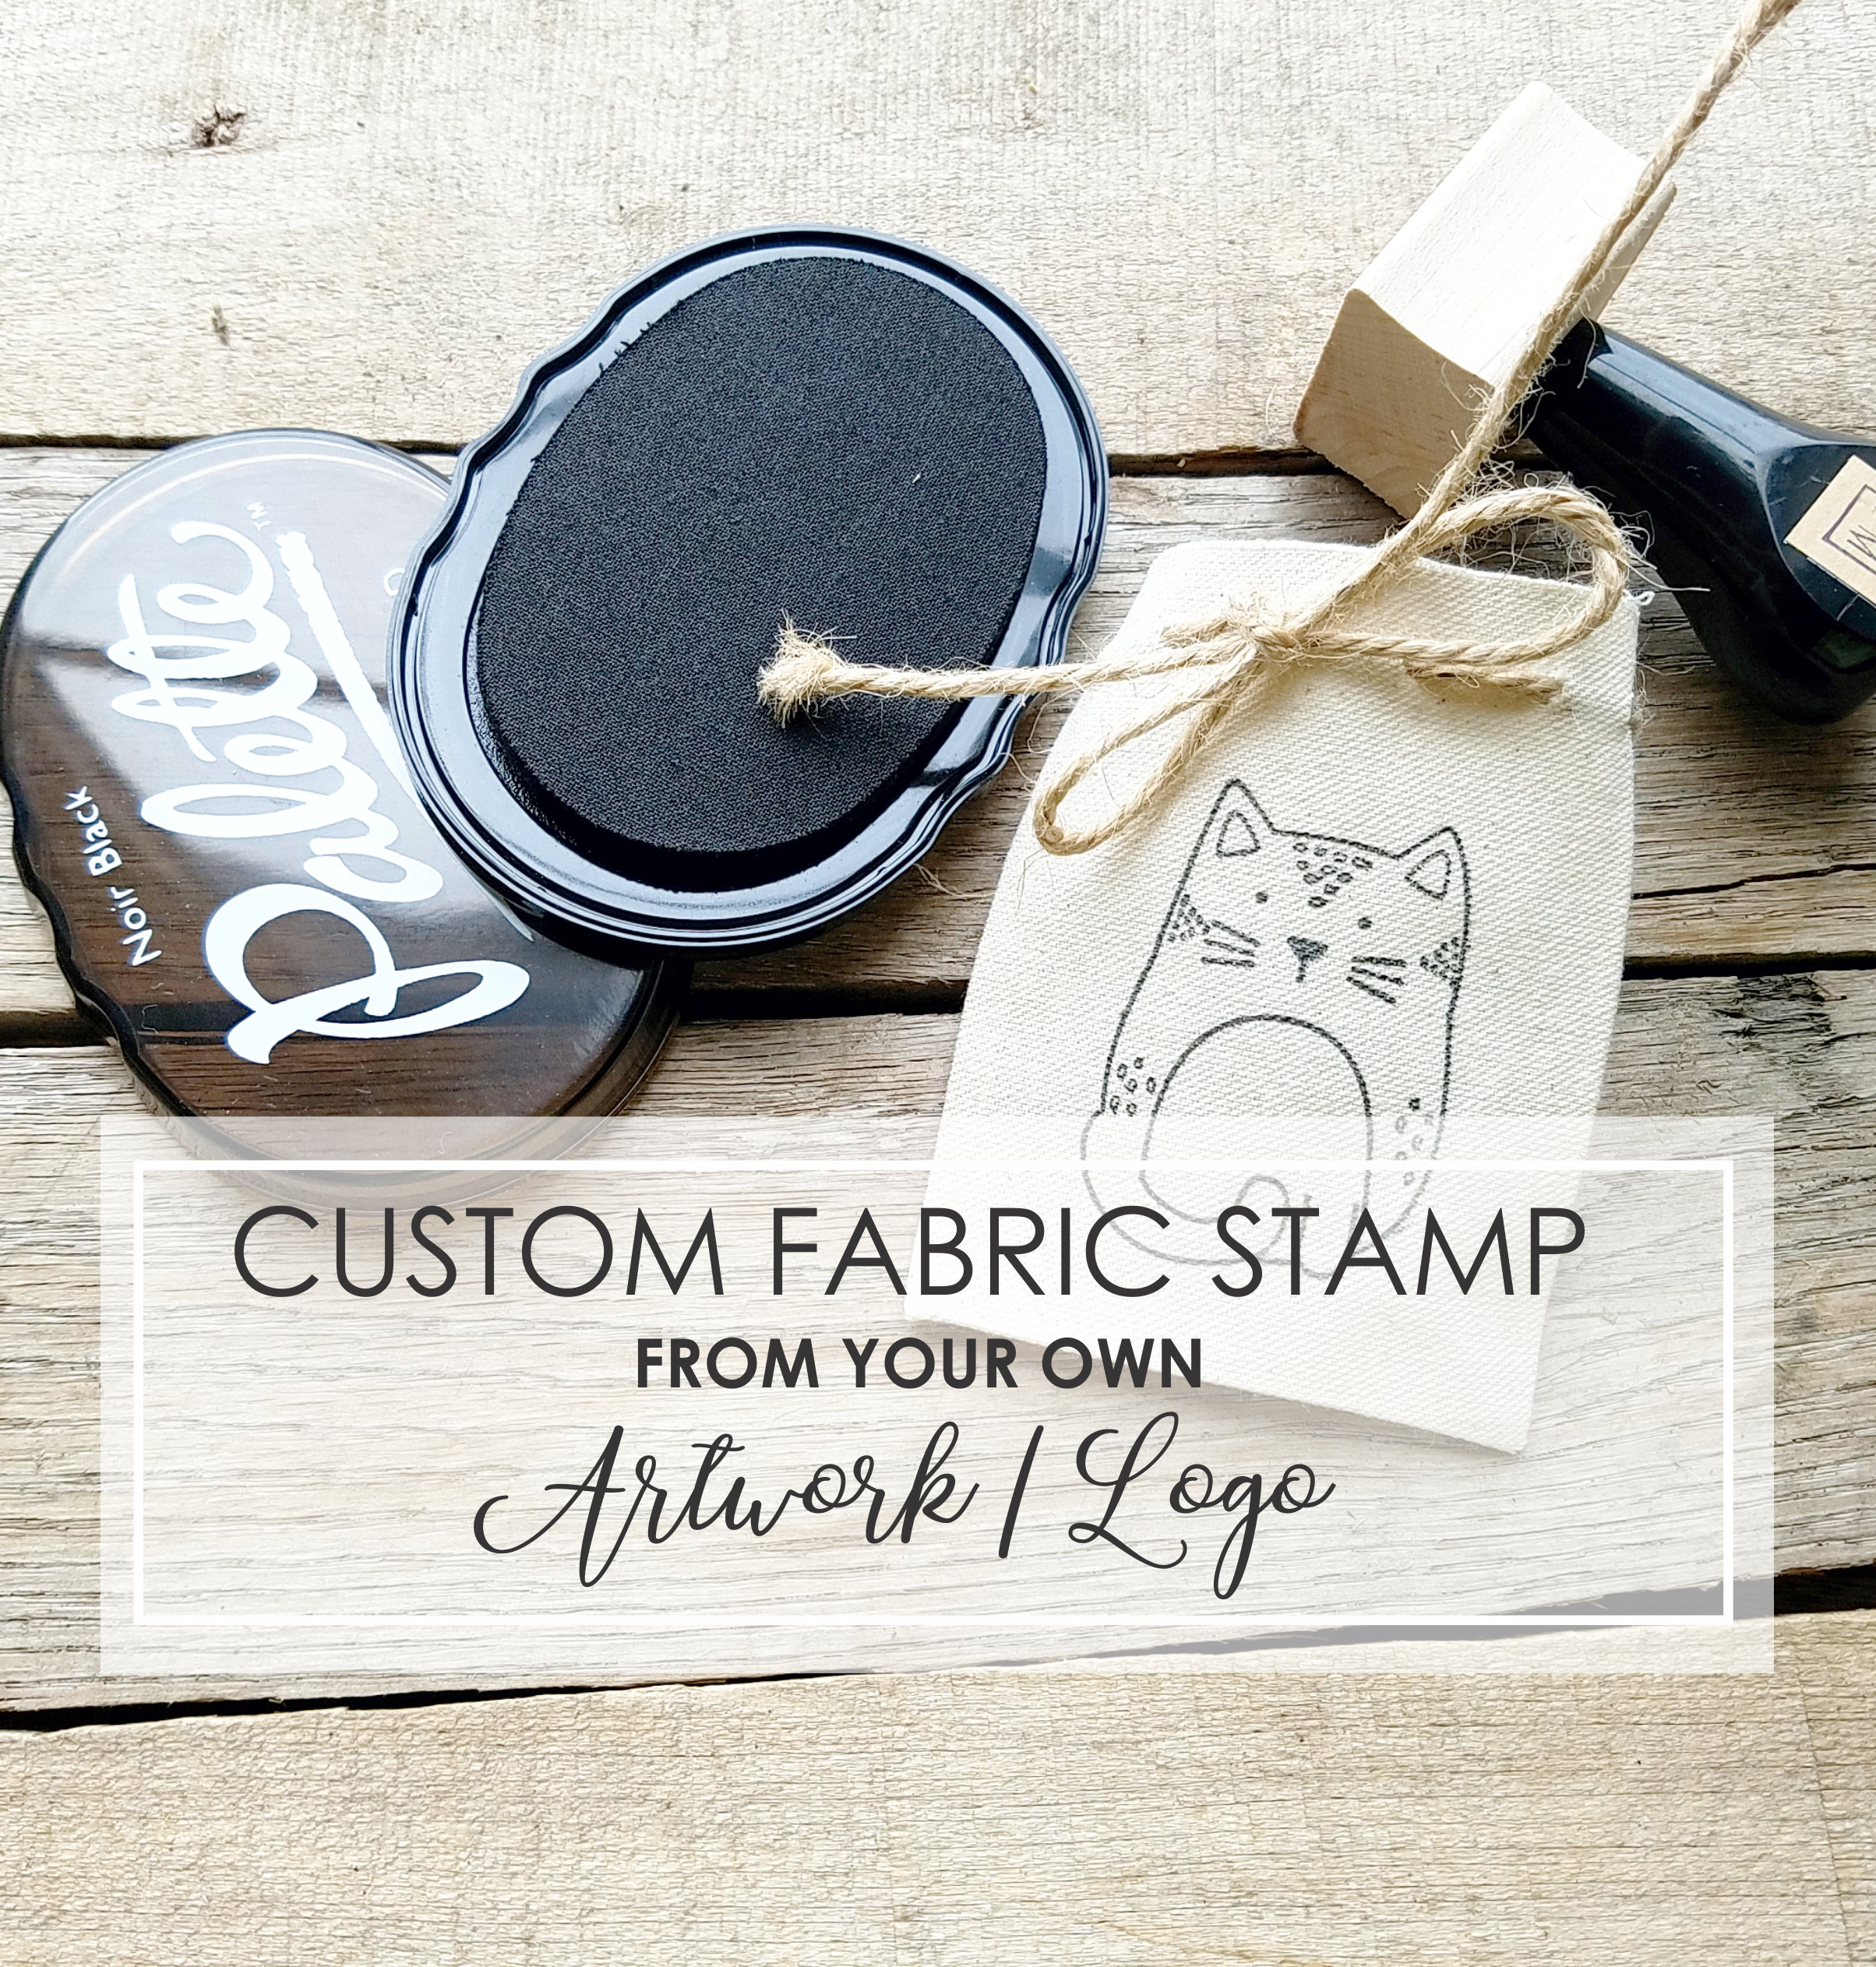 Black Fabric Ink Stamp Pad, Fabric Ink Pad for Rubber Stamps, Fabric Stamp  Ink, Permanent Ink for Canvas, and Muslin, Dark Ink 